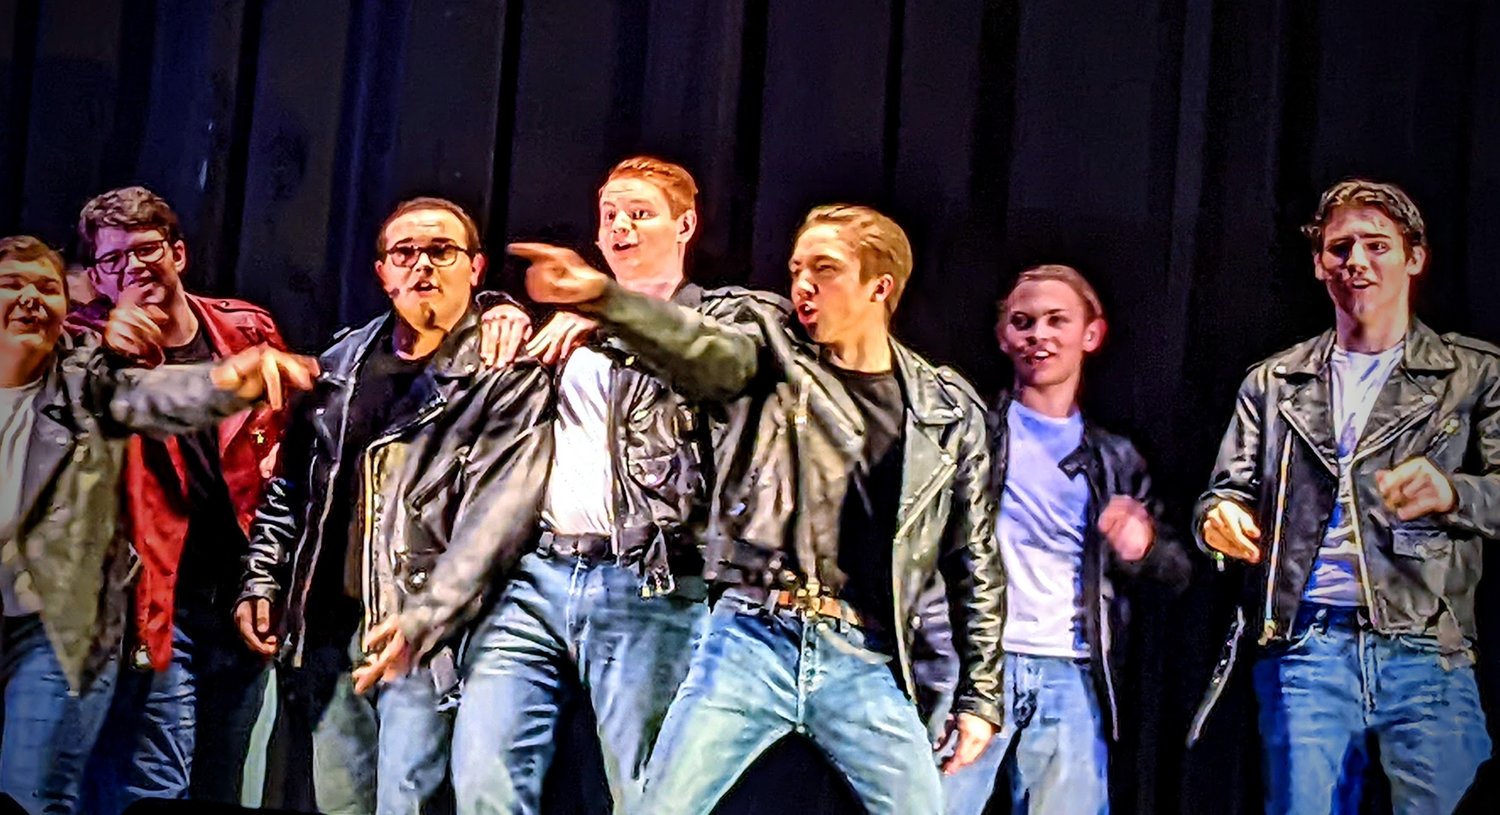 The greasers take the stage at a recent performance of "Grease" at the Honesdale Performing Arts Center.